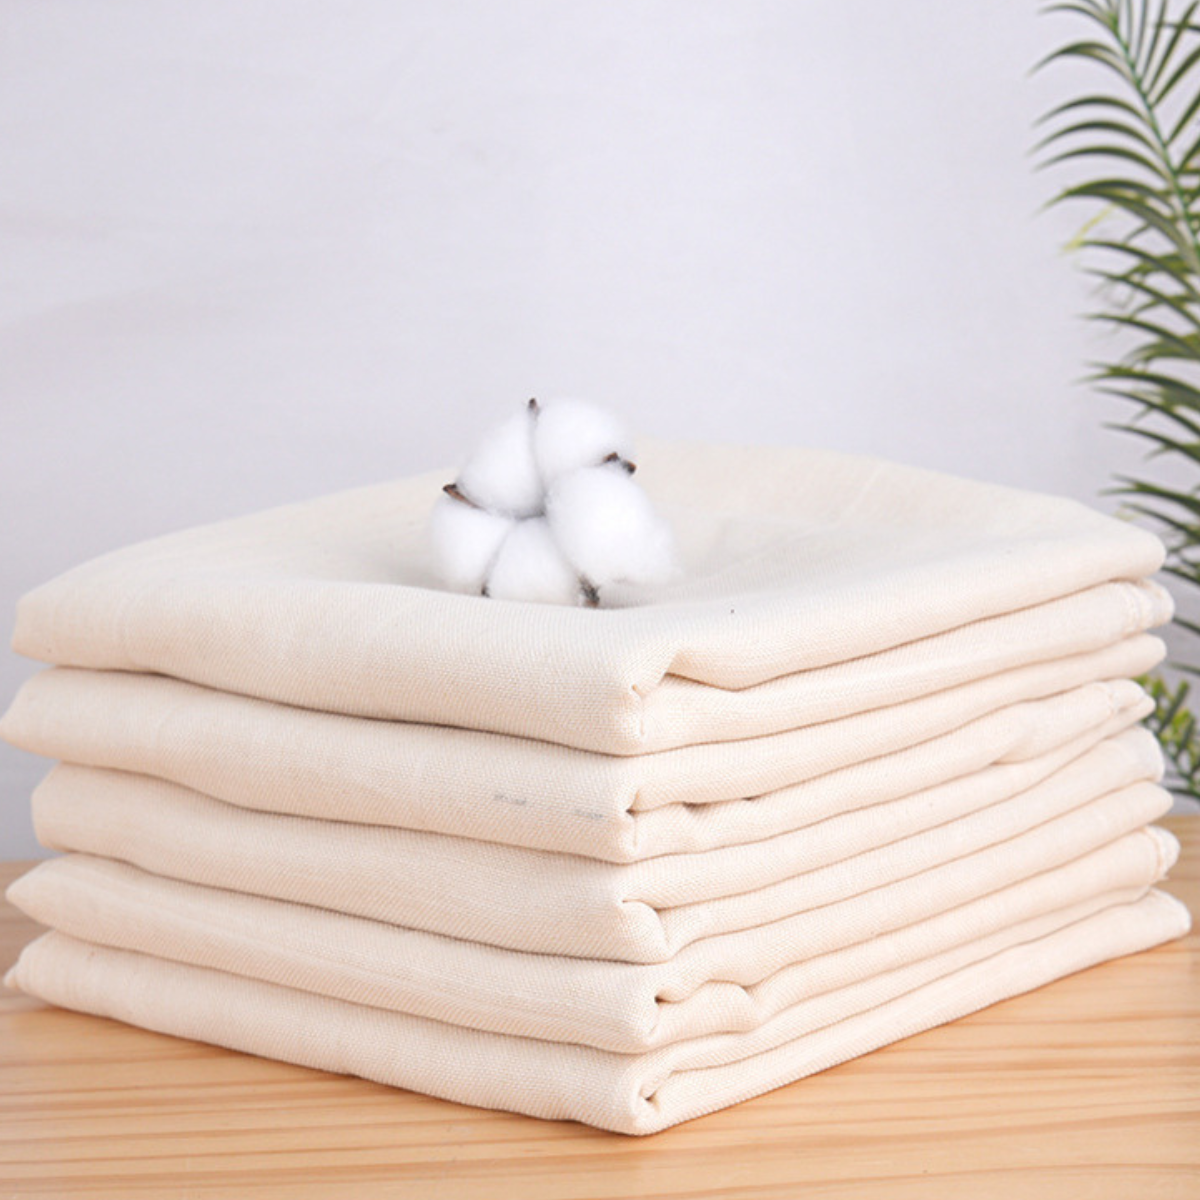 Large Reusable Grade 90 Cotton Cheesecloth for Cooking (8 PC